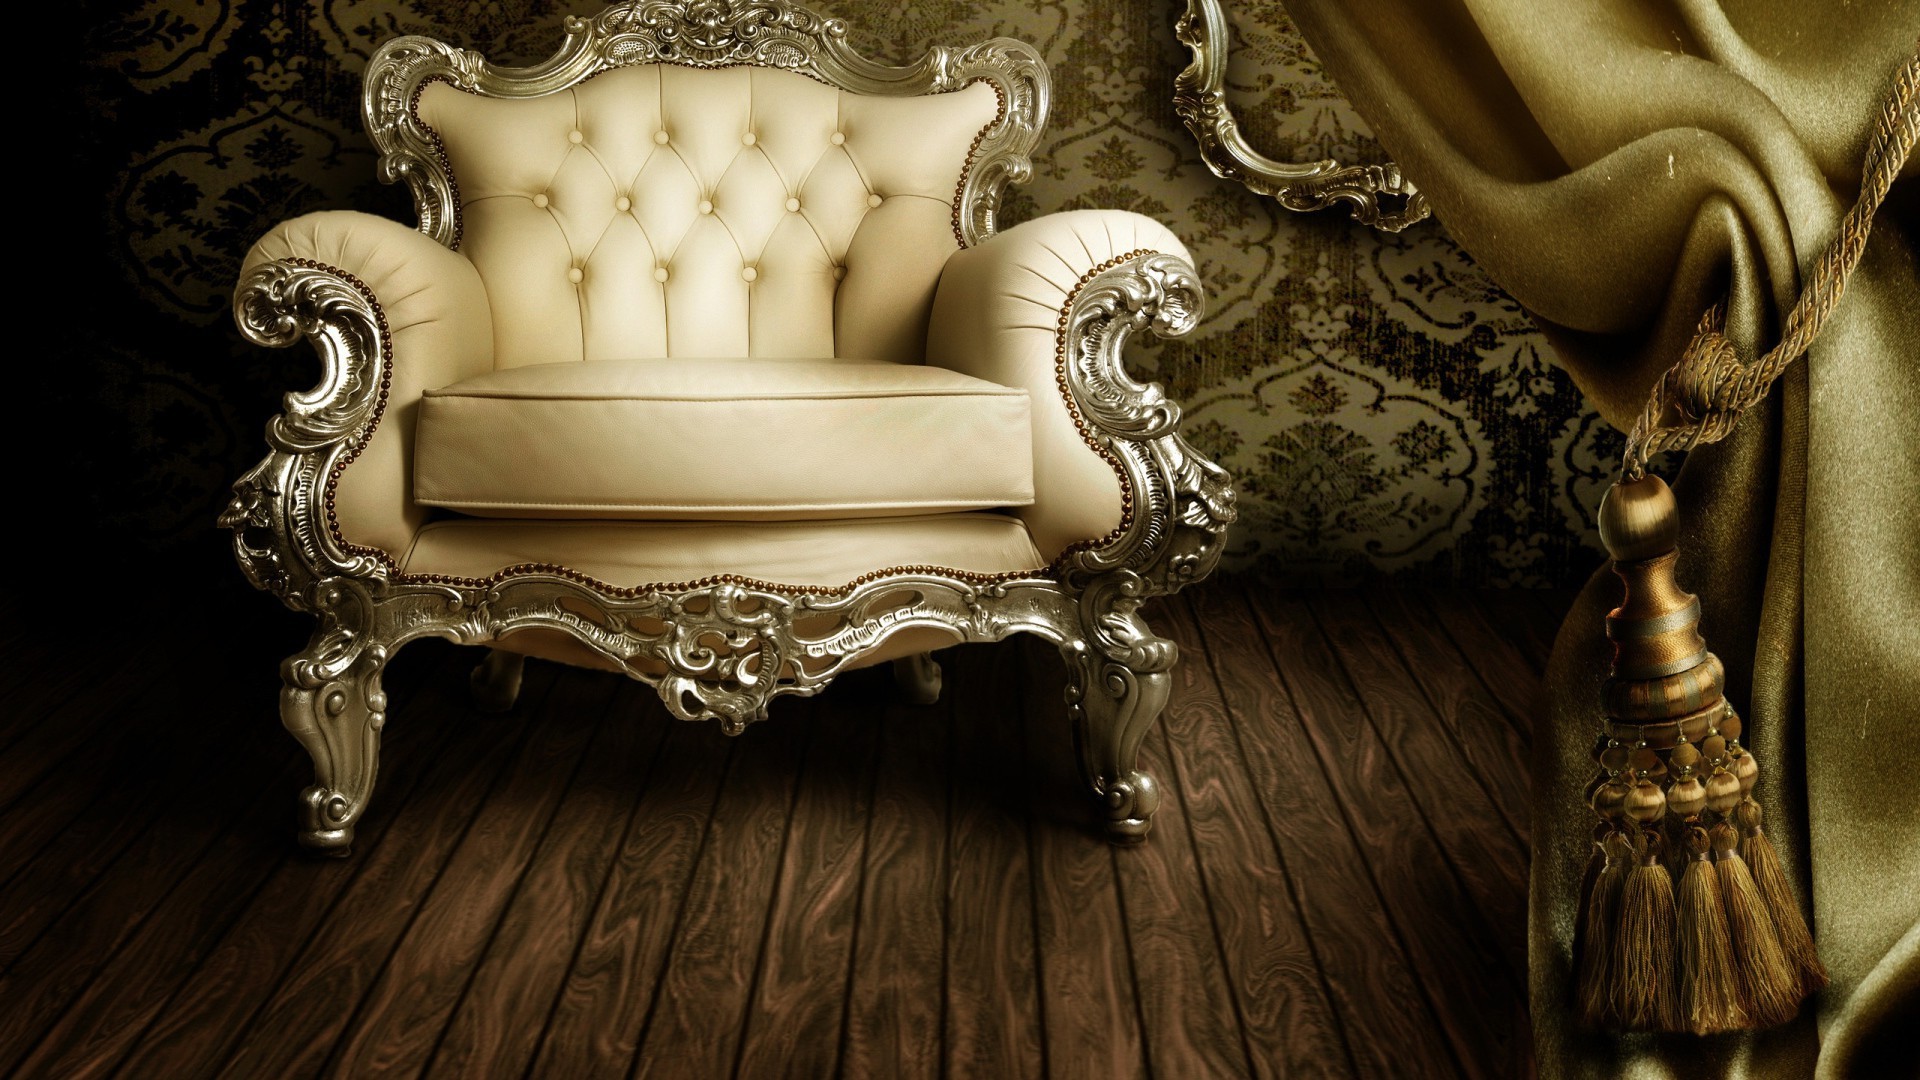 furniture luxury decoration antique style sofa gold vintage art old imperial upholstery retro classic interior indoors armchair chair design seat